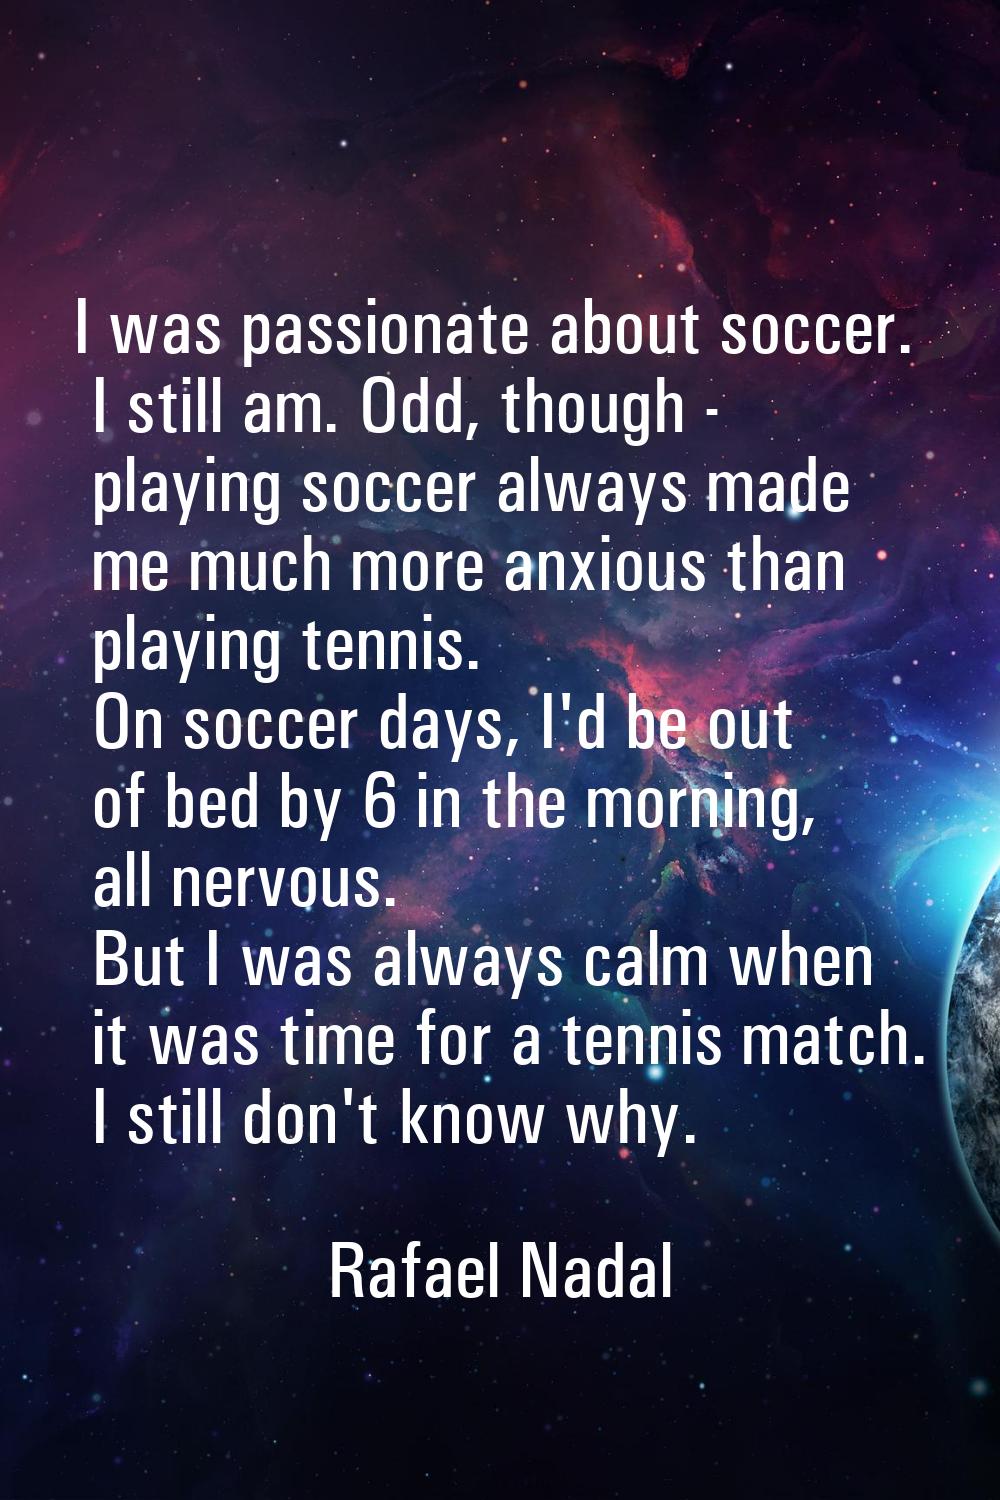 I was passionate about soccer. I still am. Odd, though - playing soccer always made me much more an